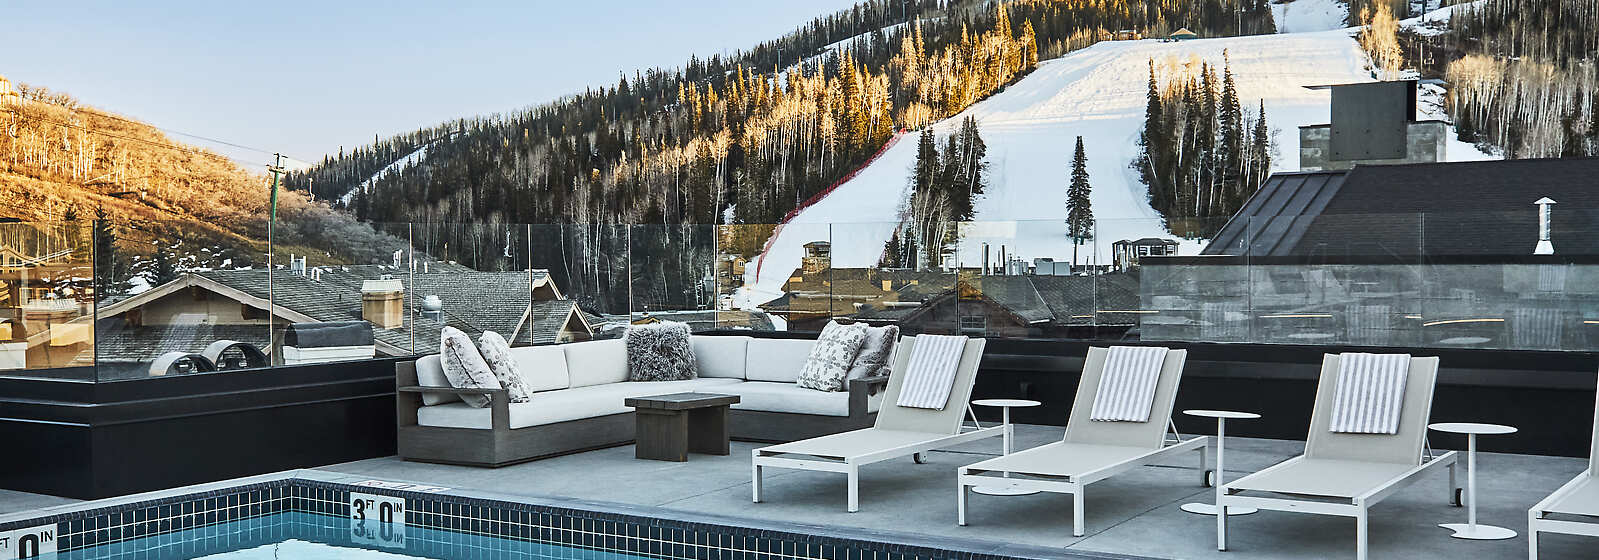 Outdoor heated rooftop pool overlooking snow covered ski slopes. 